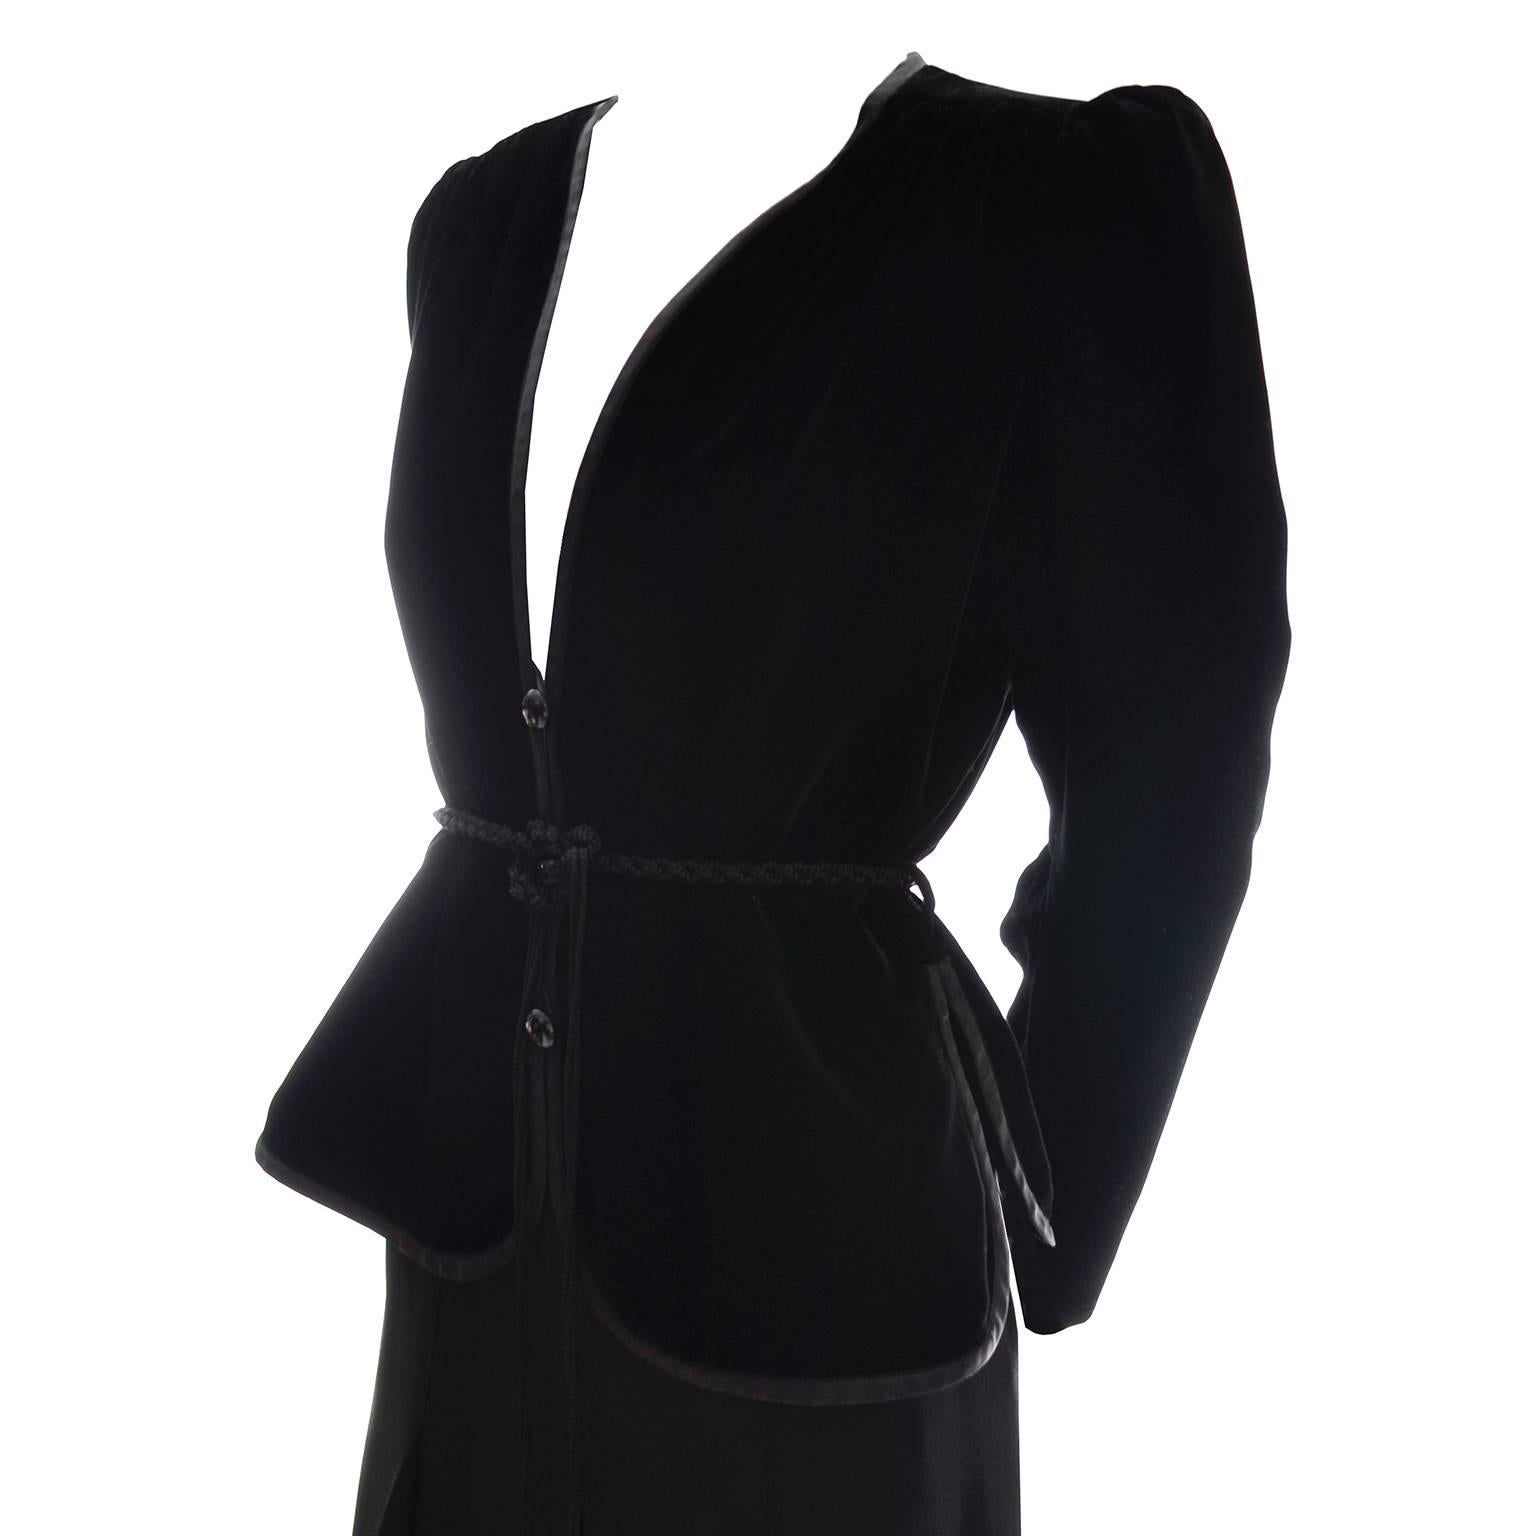 This is an extraordinary elegant 2 piece evening ensemble from Yves Saint Laurent. This sensational outfit is in excellent condition, has a beautiful long pleated rayon blend skirt with a side zipper and a gorgeous velvet top or blazer with the same